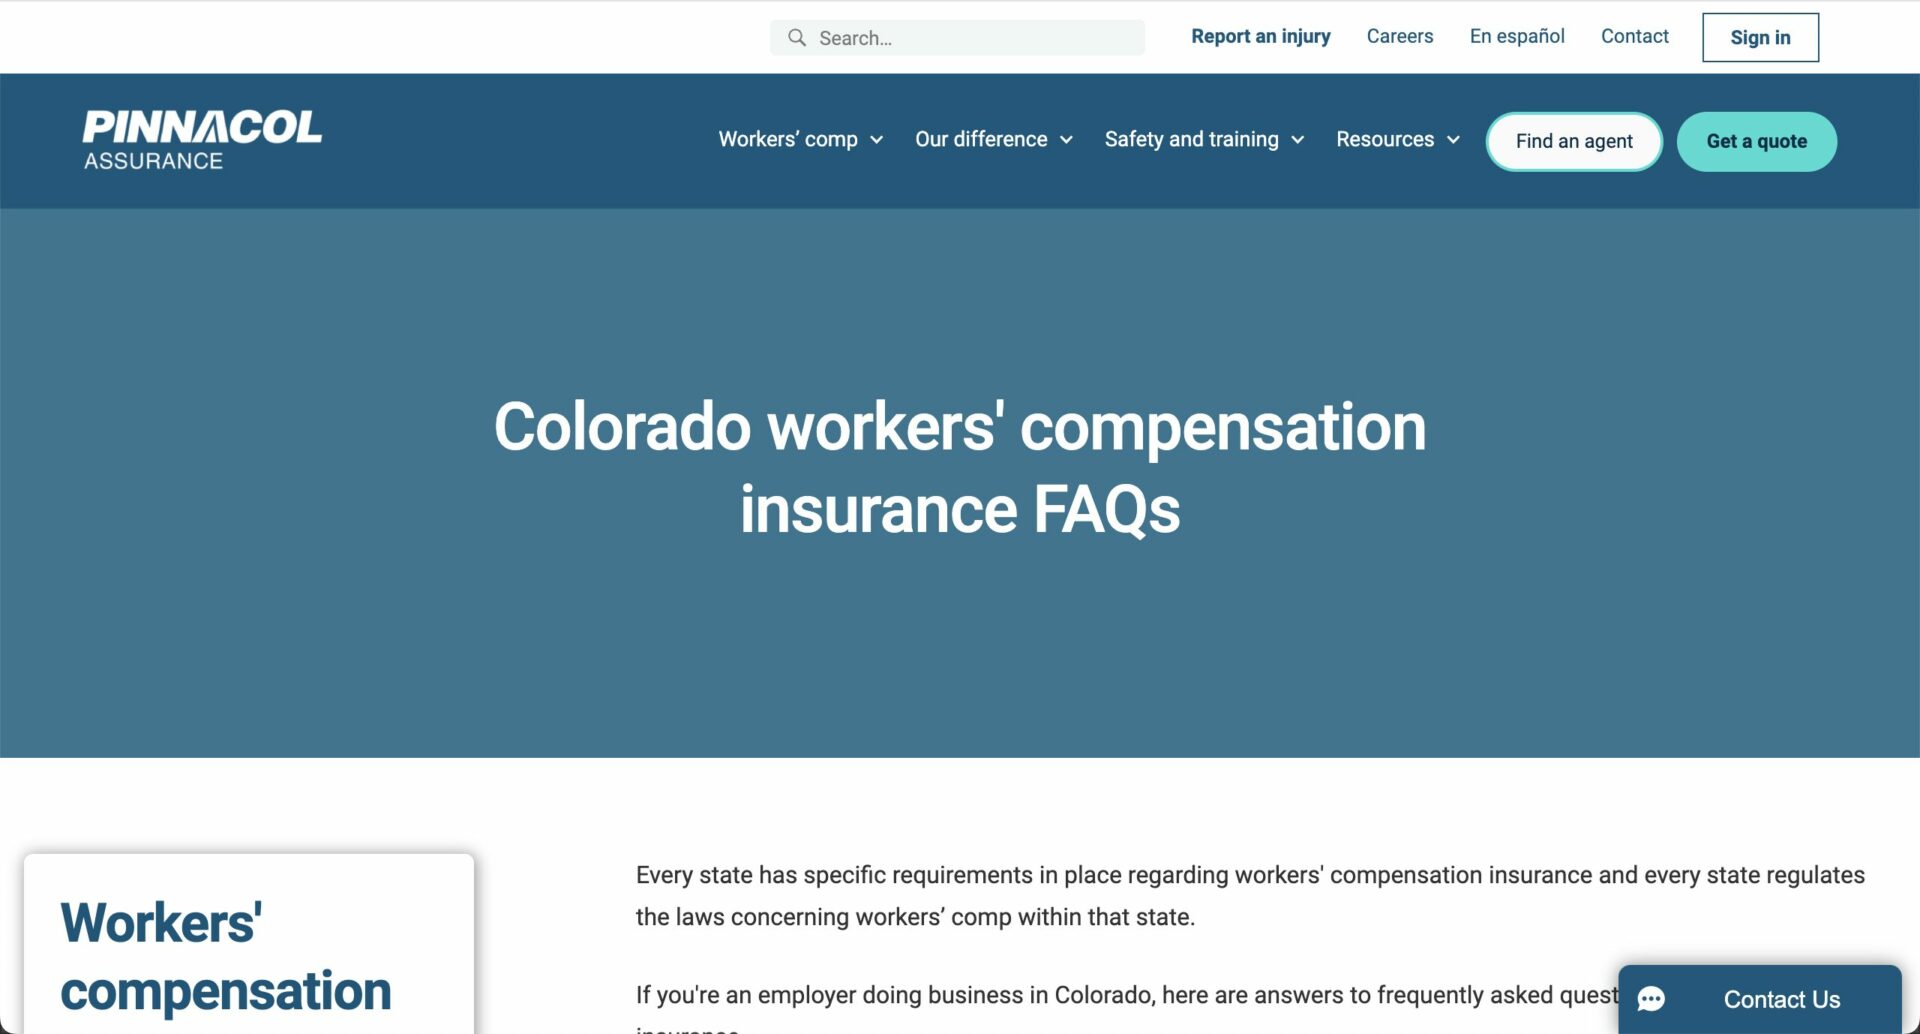 Colorado workers' compensation insurance FAQs